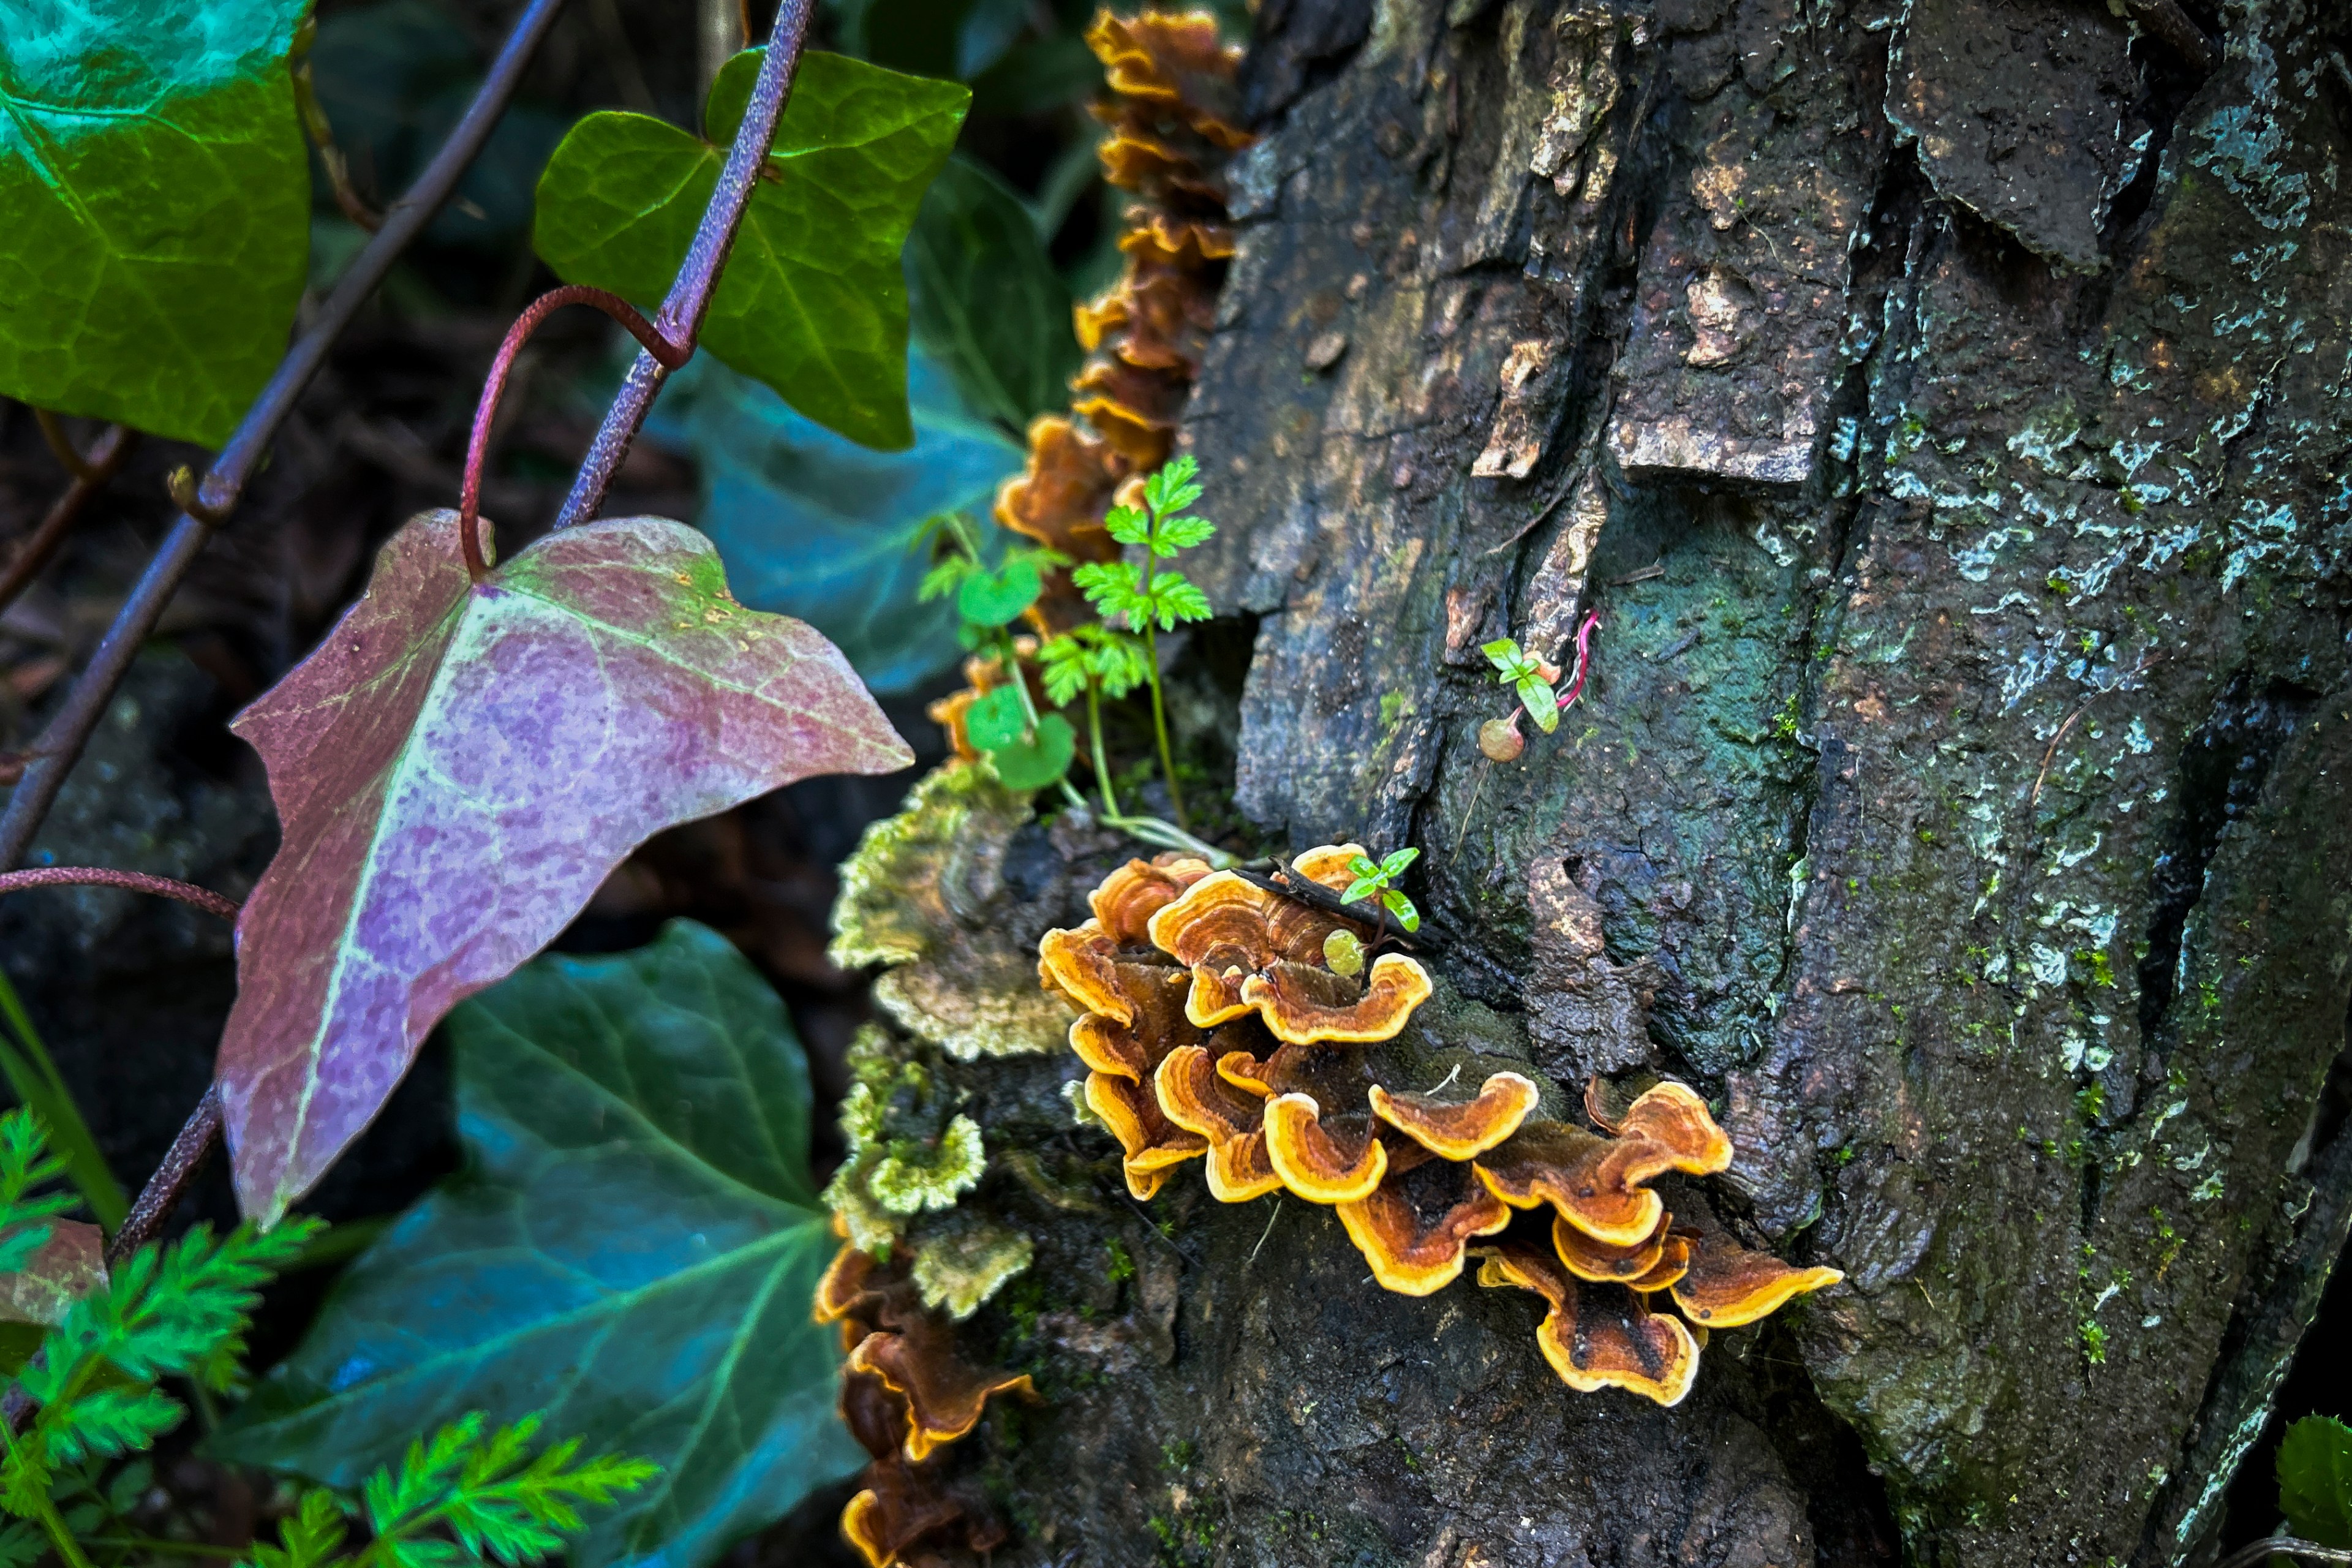 fringed yellow-and-brown mushrooms grow on on a log surrounded by leaves